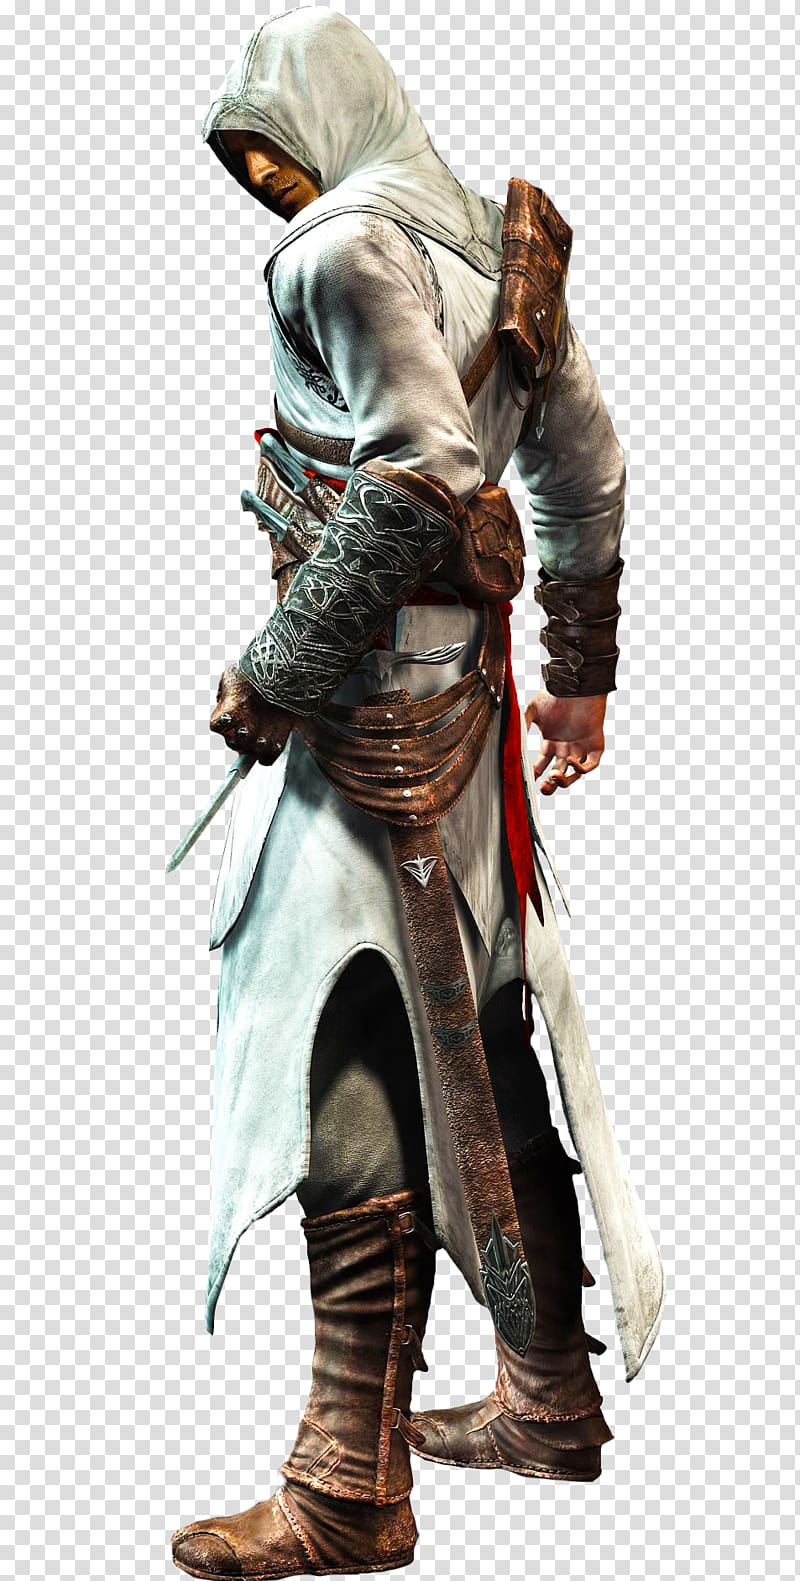 Assassin's Creed illustration, Assassins Creed III Assassins Creed: Bloodlines Assassins Creed: Revelations, Altair Assassins Creed transparent background PNG clipart